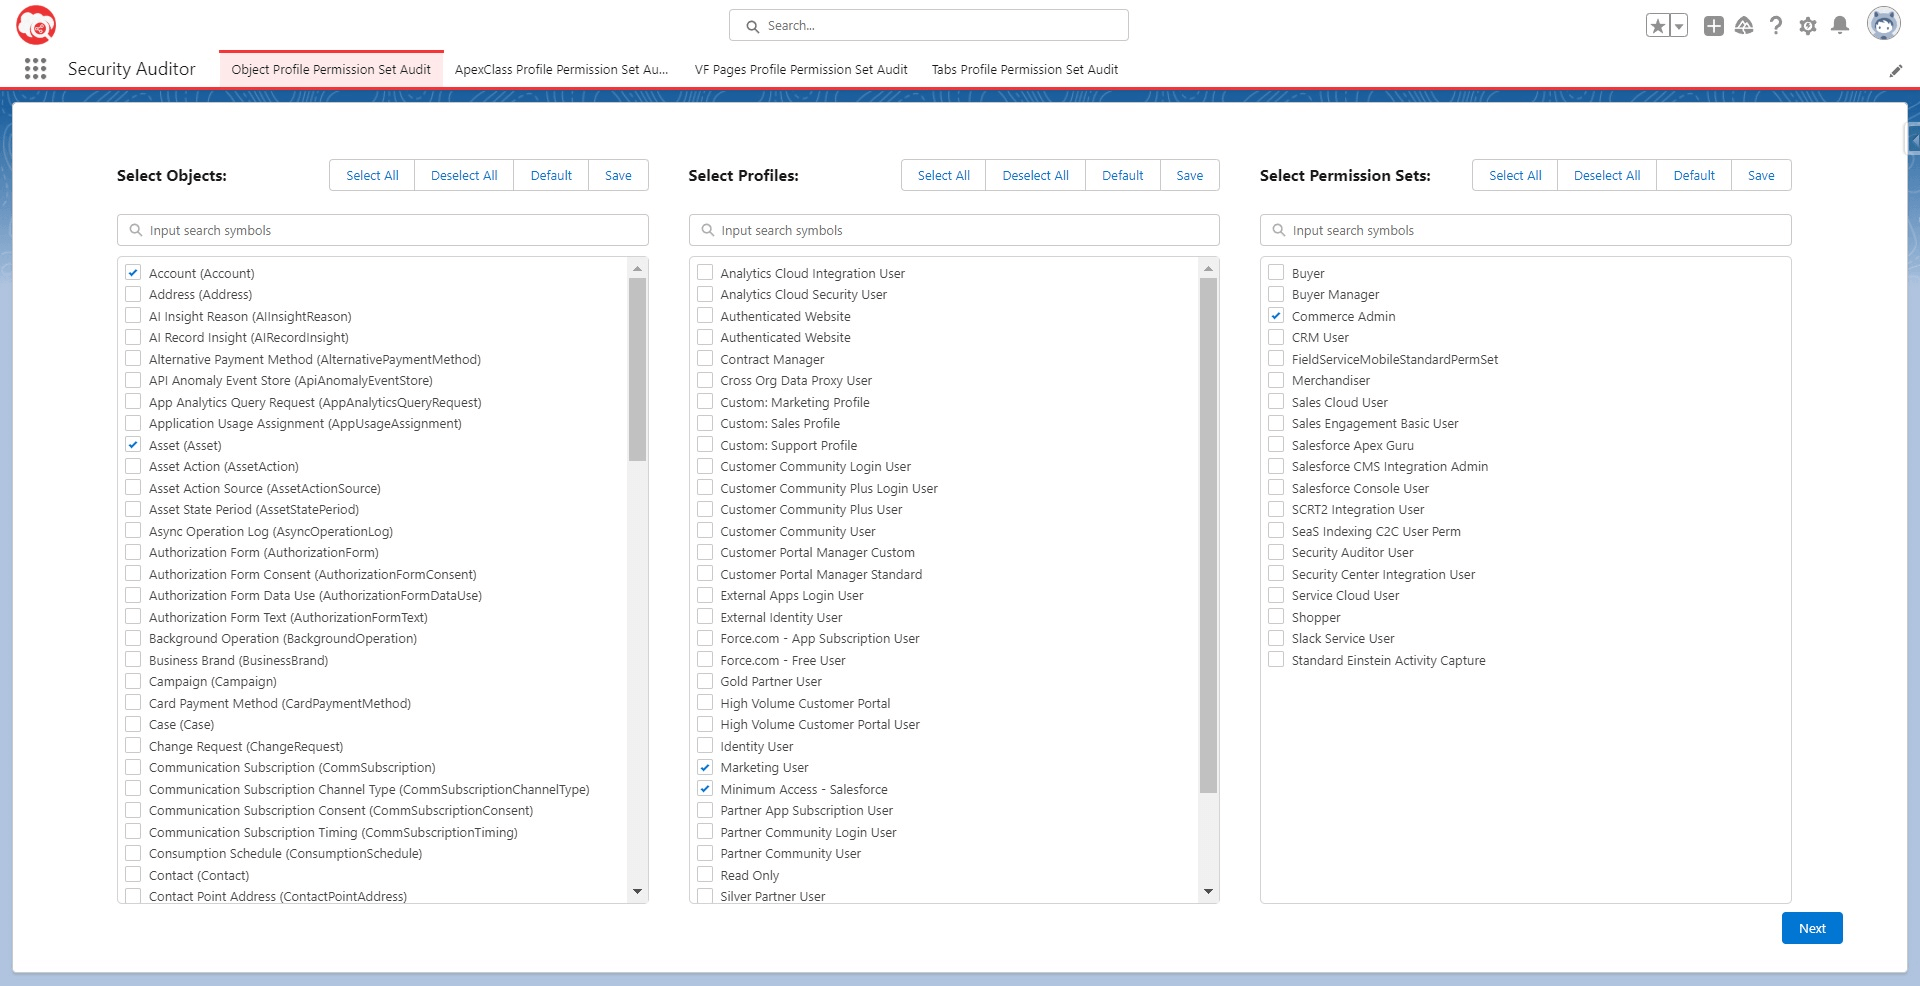 A screenshot of the page with options for selecting Objects, Profiles, and Permission sets in Security Auditor